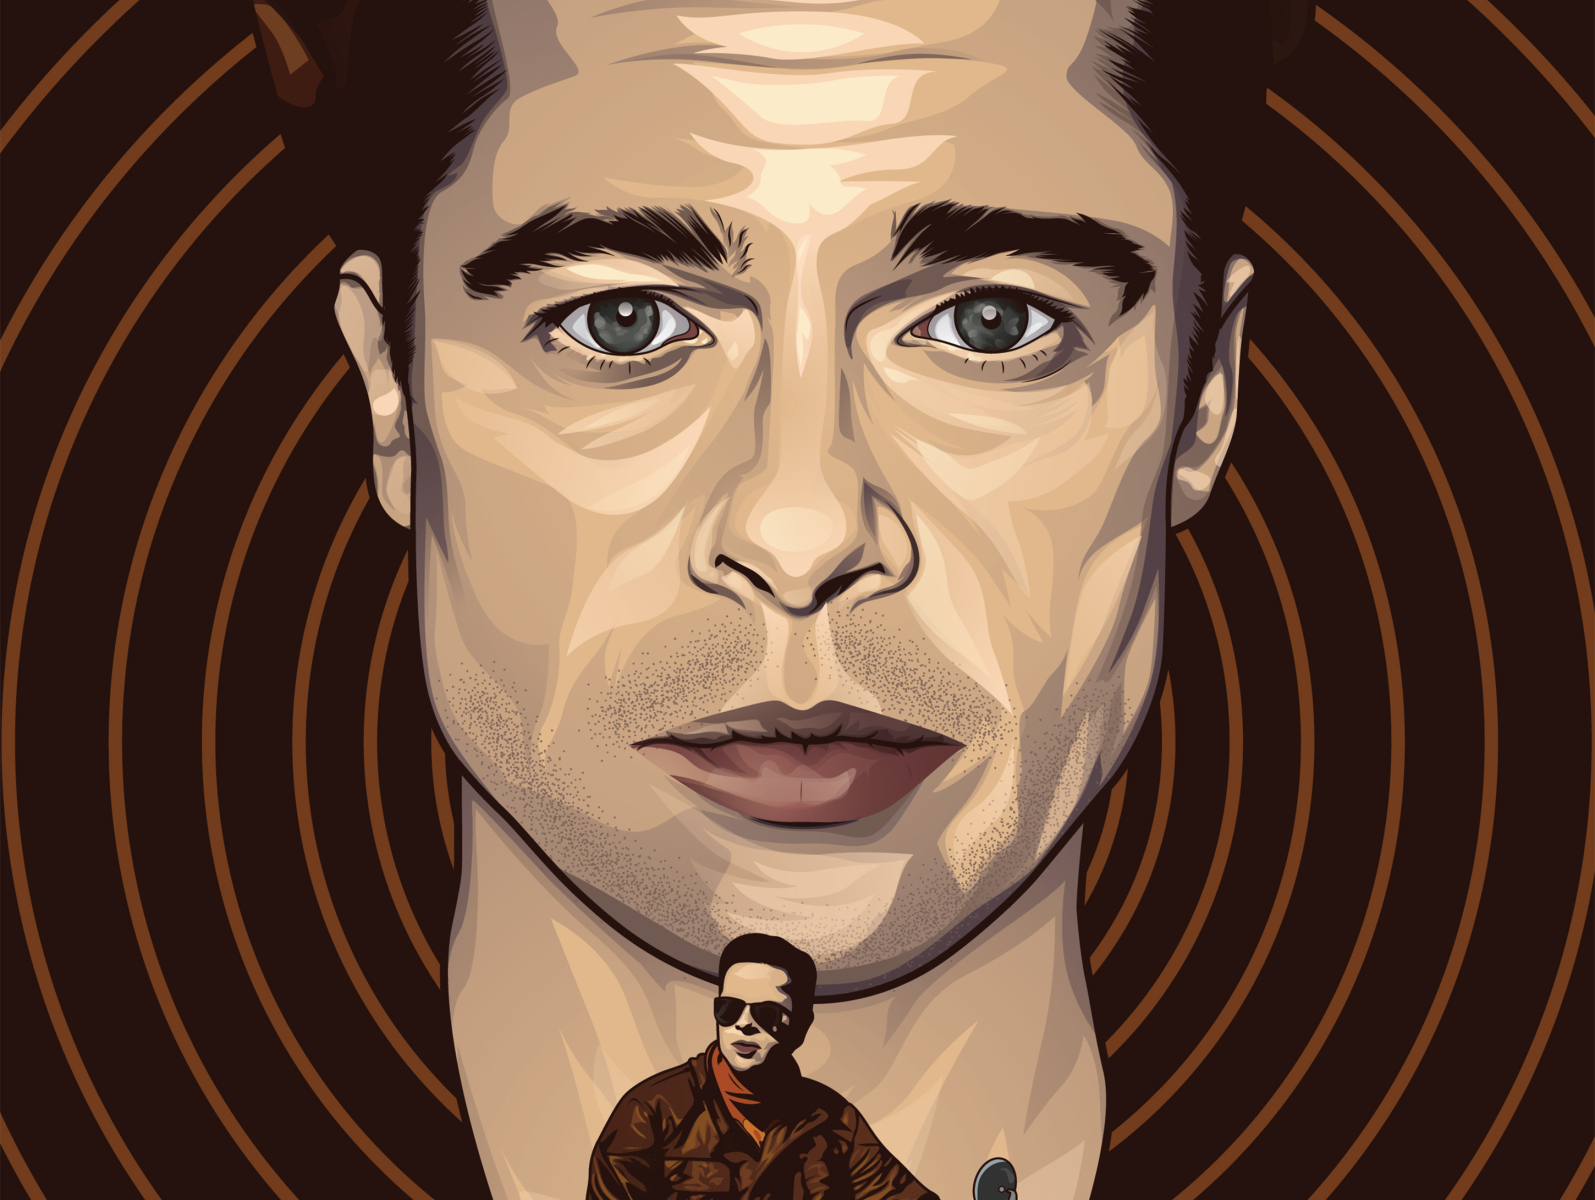 benjamin button by angelo mones on Dribbble